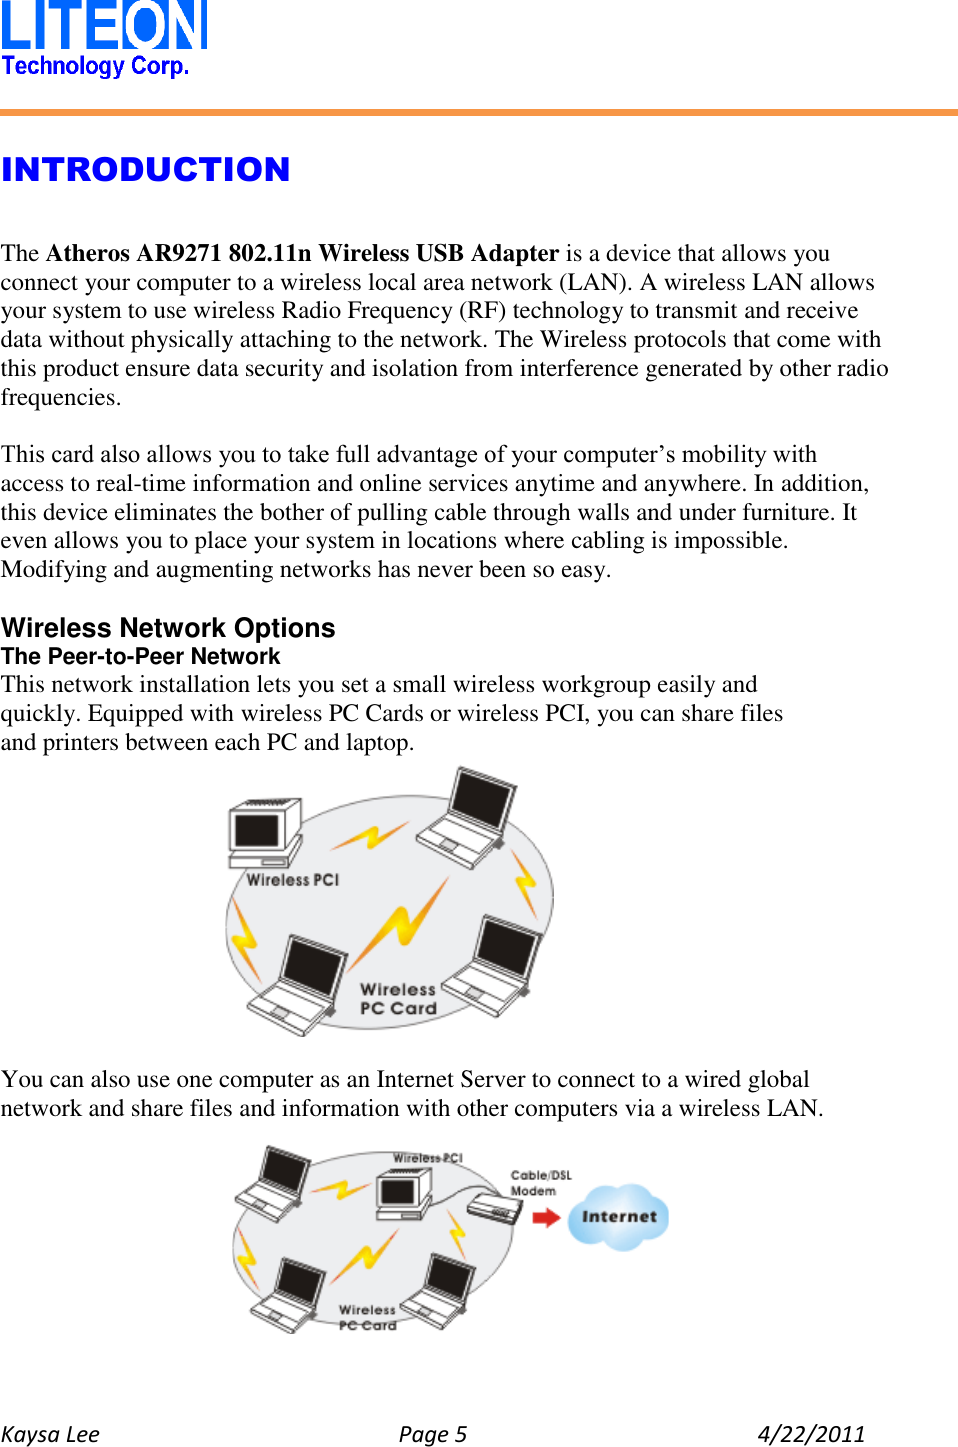   Kaysa Lee  Page 5  4/22/2011    INTRODUCTION  The Atheros AR9271 802.11n Wireless USB Adapter is a device that allows you connect your computer to a wireless local area network (LAN). A wireless LAN allows your system to use wireless Radio Frequency (RF) technology to transmit and receive data without physically attaching to the network. The Wireless protocols that come with this product ensure data security and isolation from interference generated by other radio frequencies.  This card also allows you to take full advantage of your computer’s mobility with access to real-time information and online services anytime and anywhere. In addition, this device eliminates the bother of pulling cable through walls and under furniture. It even allows you to place your system in locations where cabling is impossible. Modifying and augmenting networks has never been so easy.  Wireless Network Options The Peer-to-Peer Network This network installation lets you set a small wireless workgroup easily and quickly. Equipped with wireless PC Cards or wireless PCI, you can share files and printers between each PC and laptop.      You can also use one computer as an Internet Server to connect to a wired global network and share files and information with other computers via a wireless LAN.   